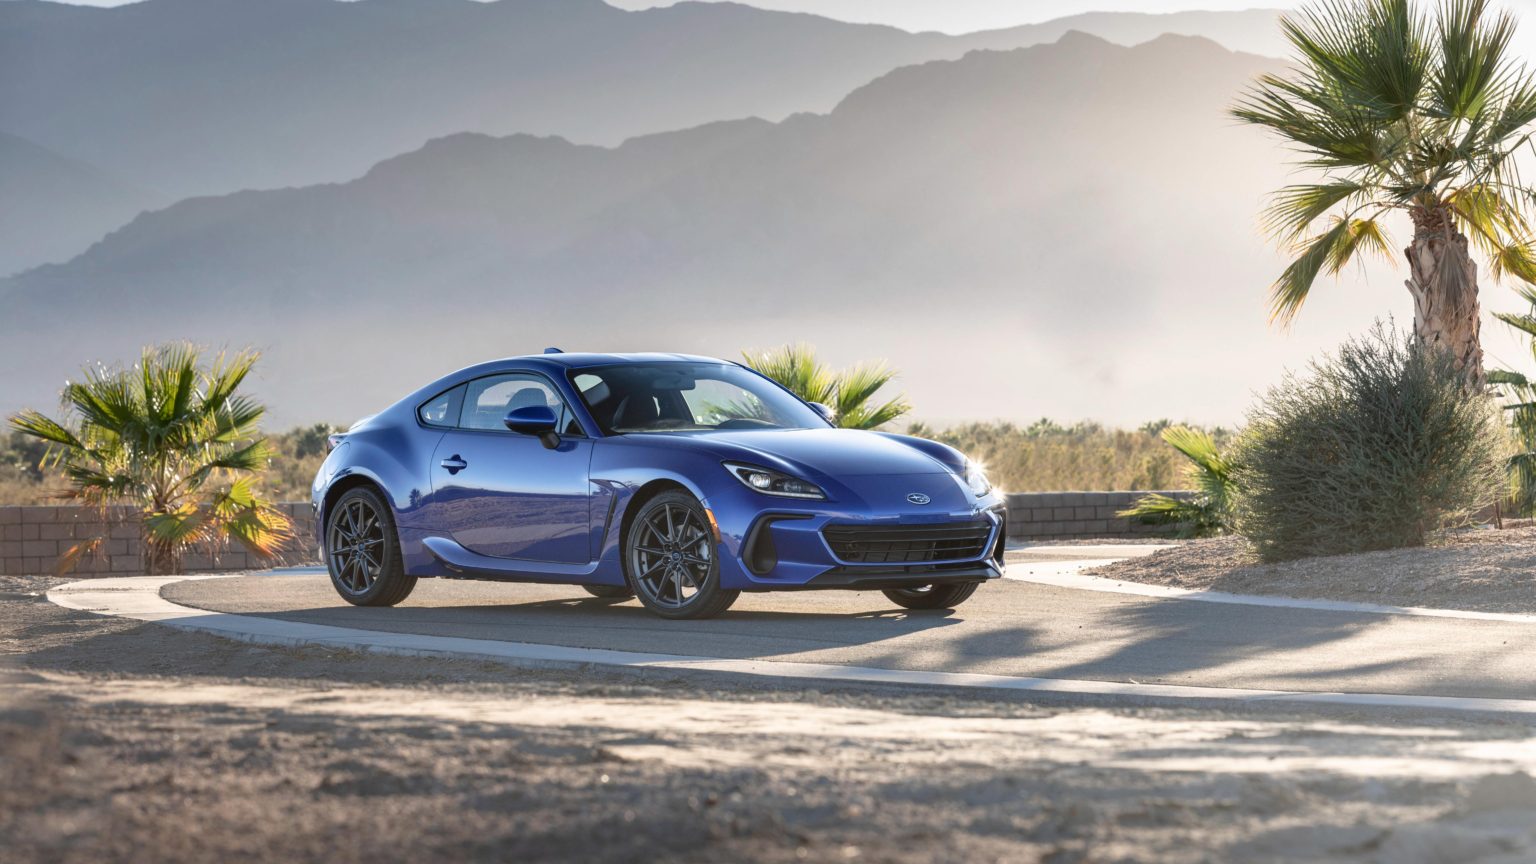 The BRZ is all-new for 2022.